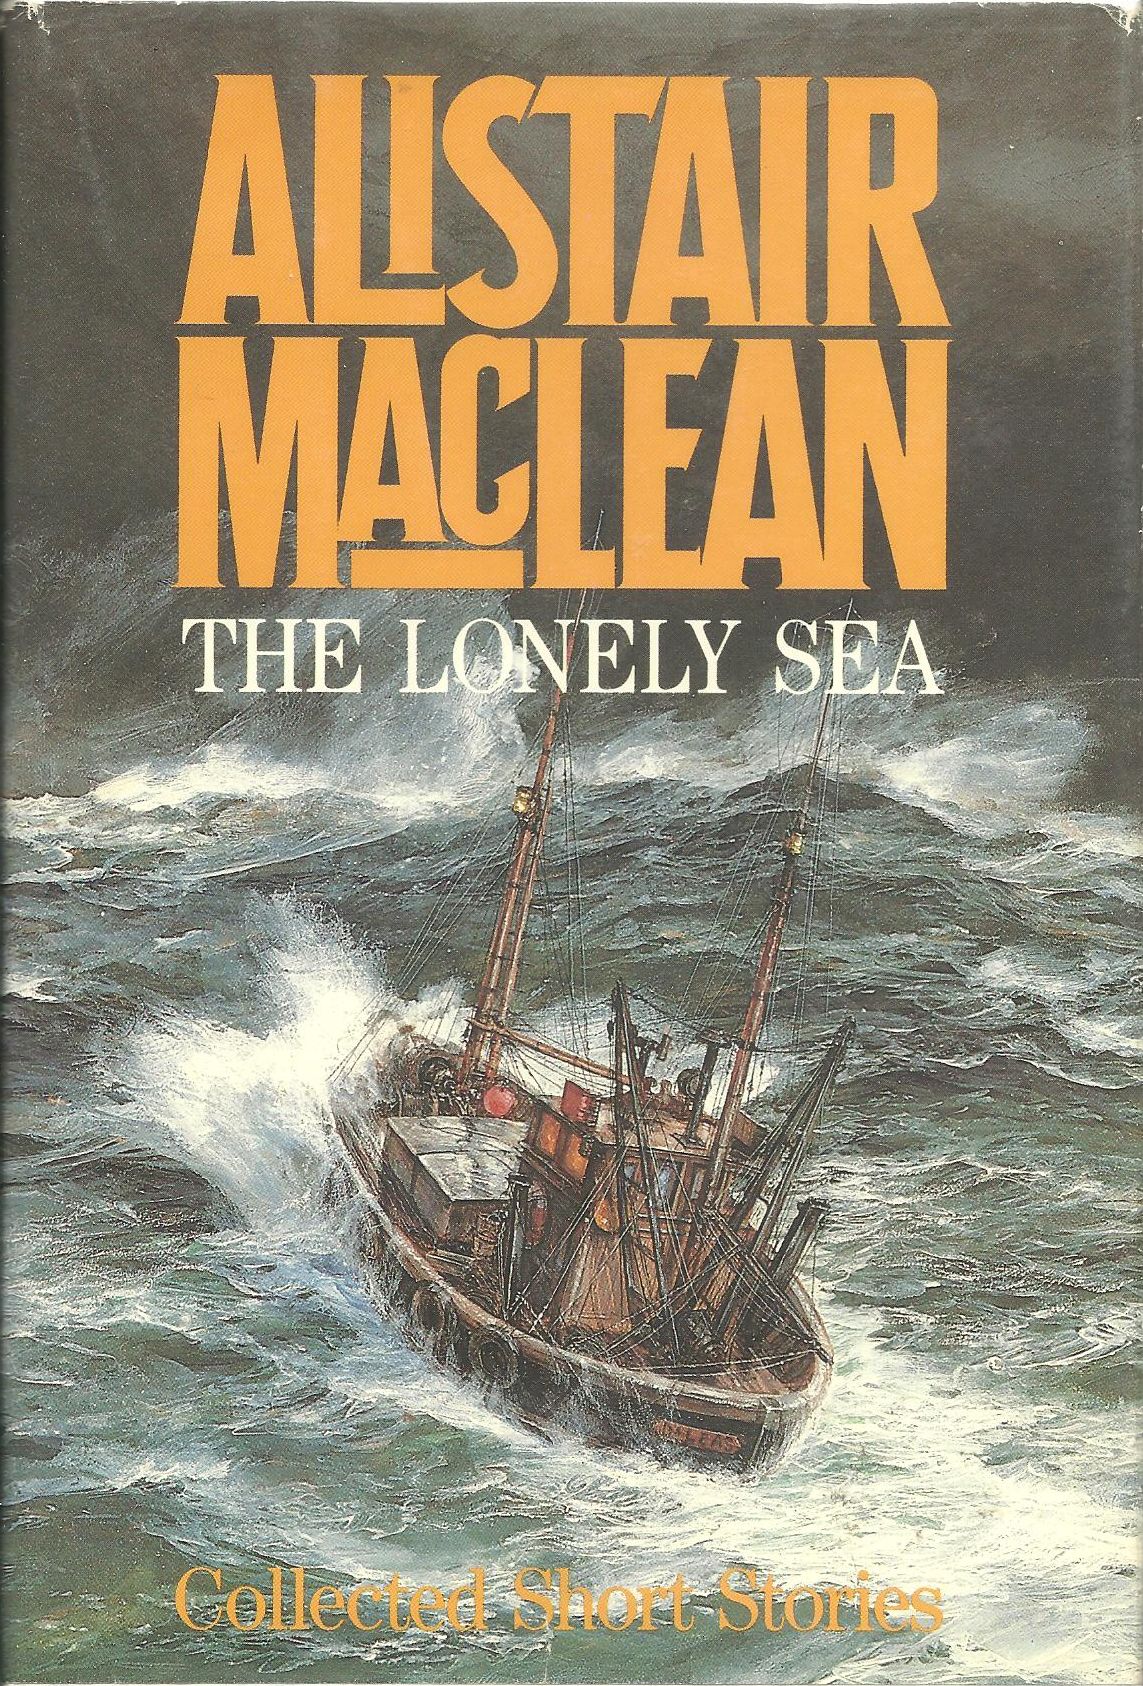 The Lonely Sea - US first edition